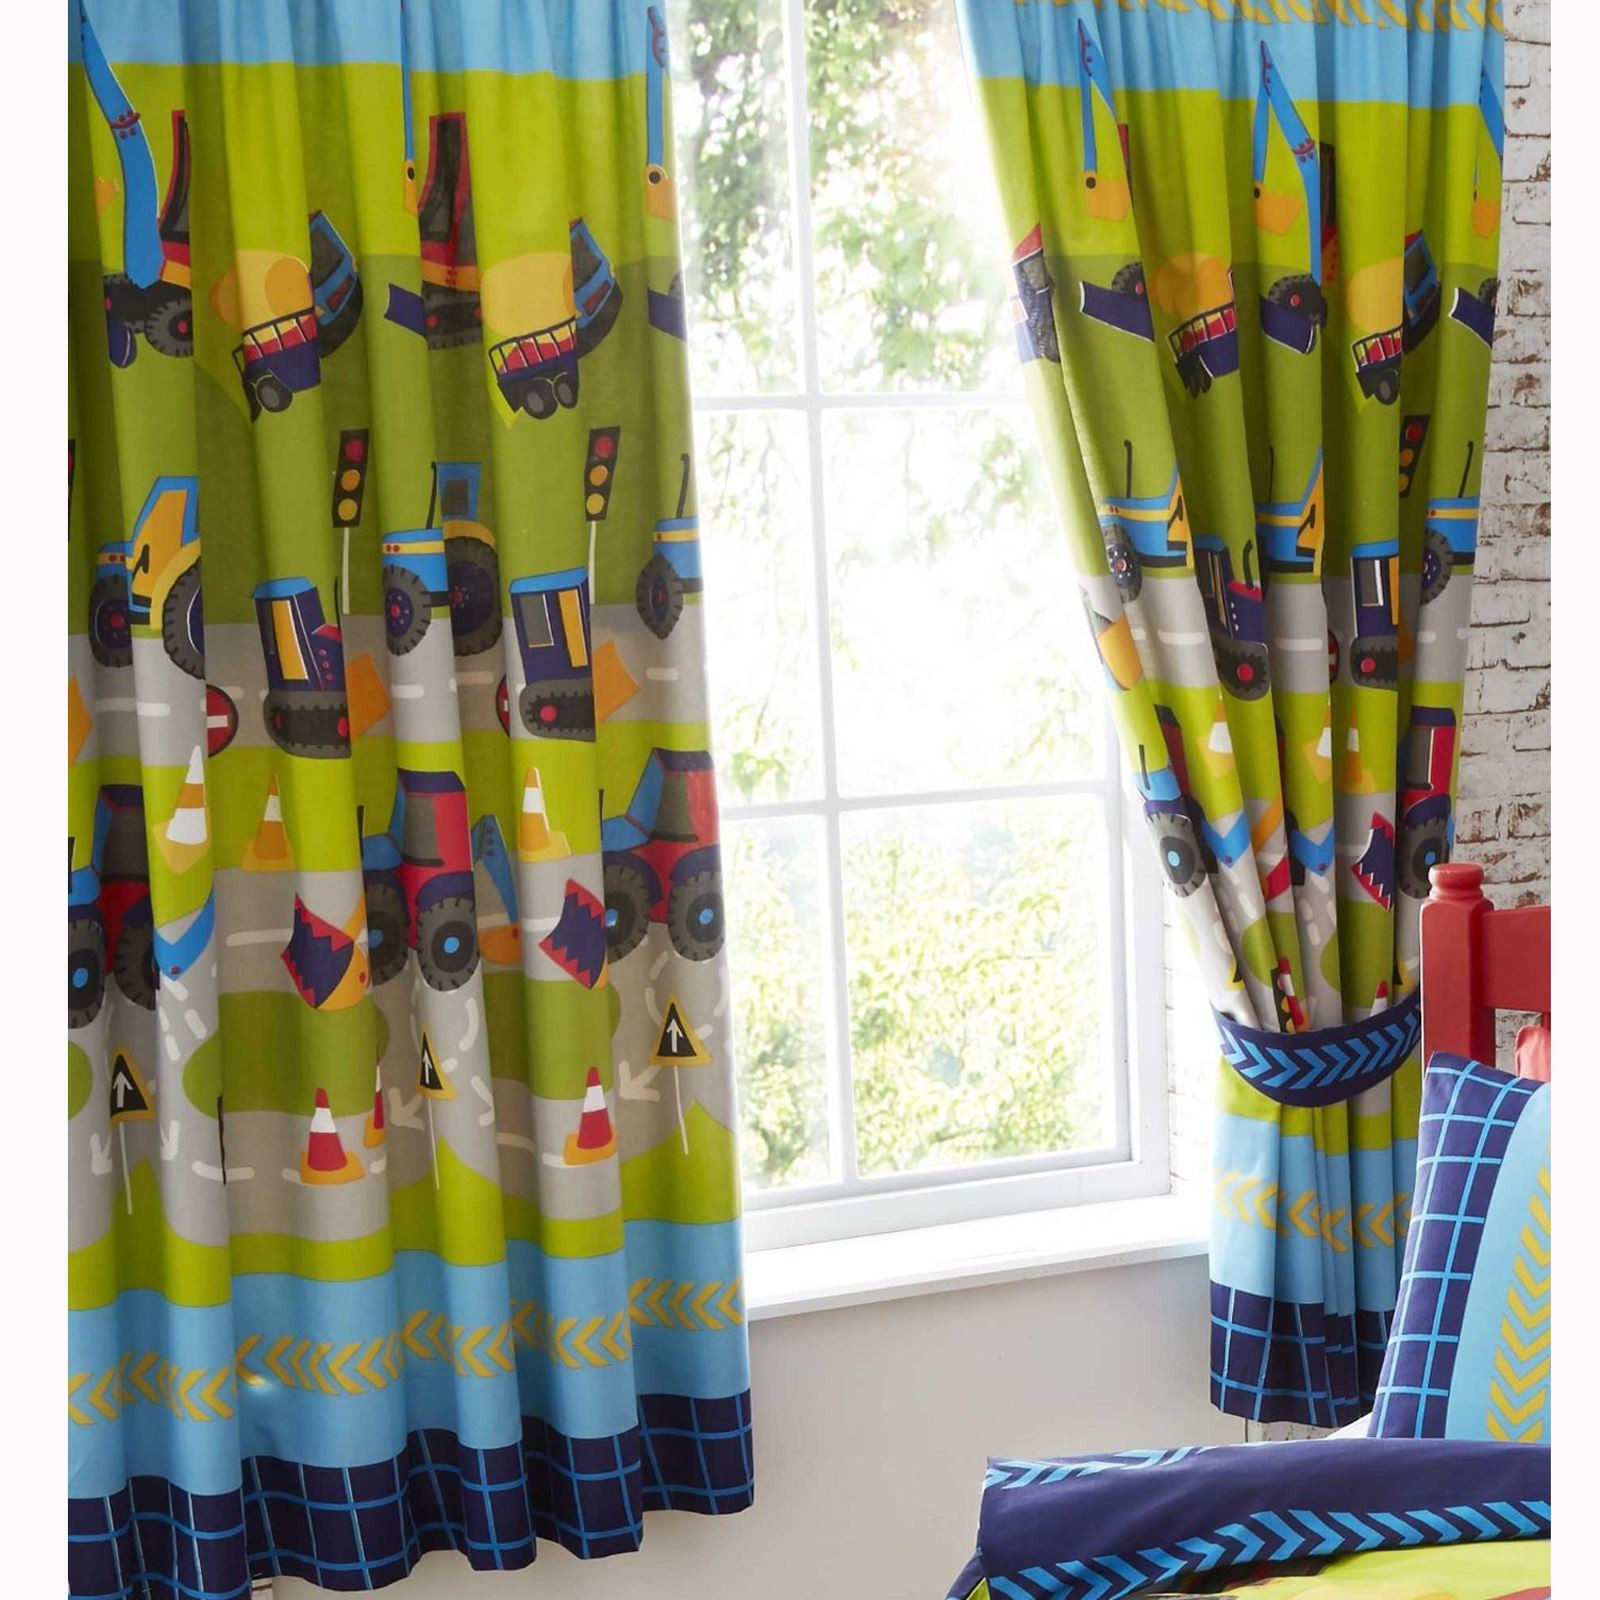 Boys Bedroom Curtains
 BOYS BEDROOM CURTAINS 66" x 72" IN VARIOUS DESIGNS FULLY